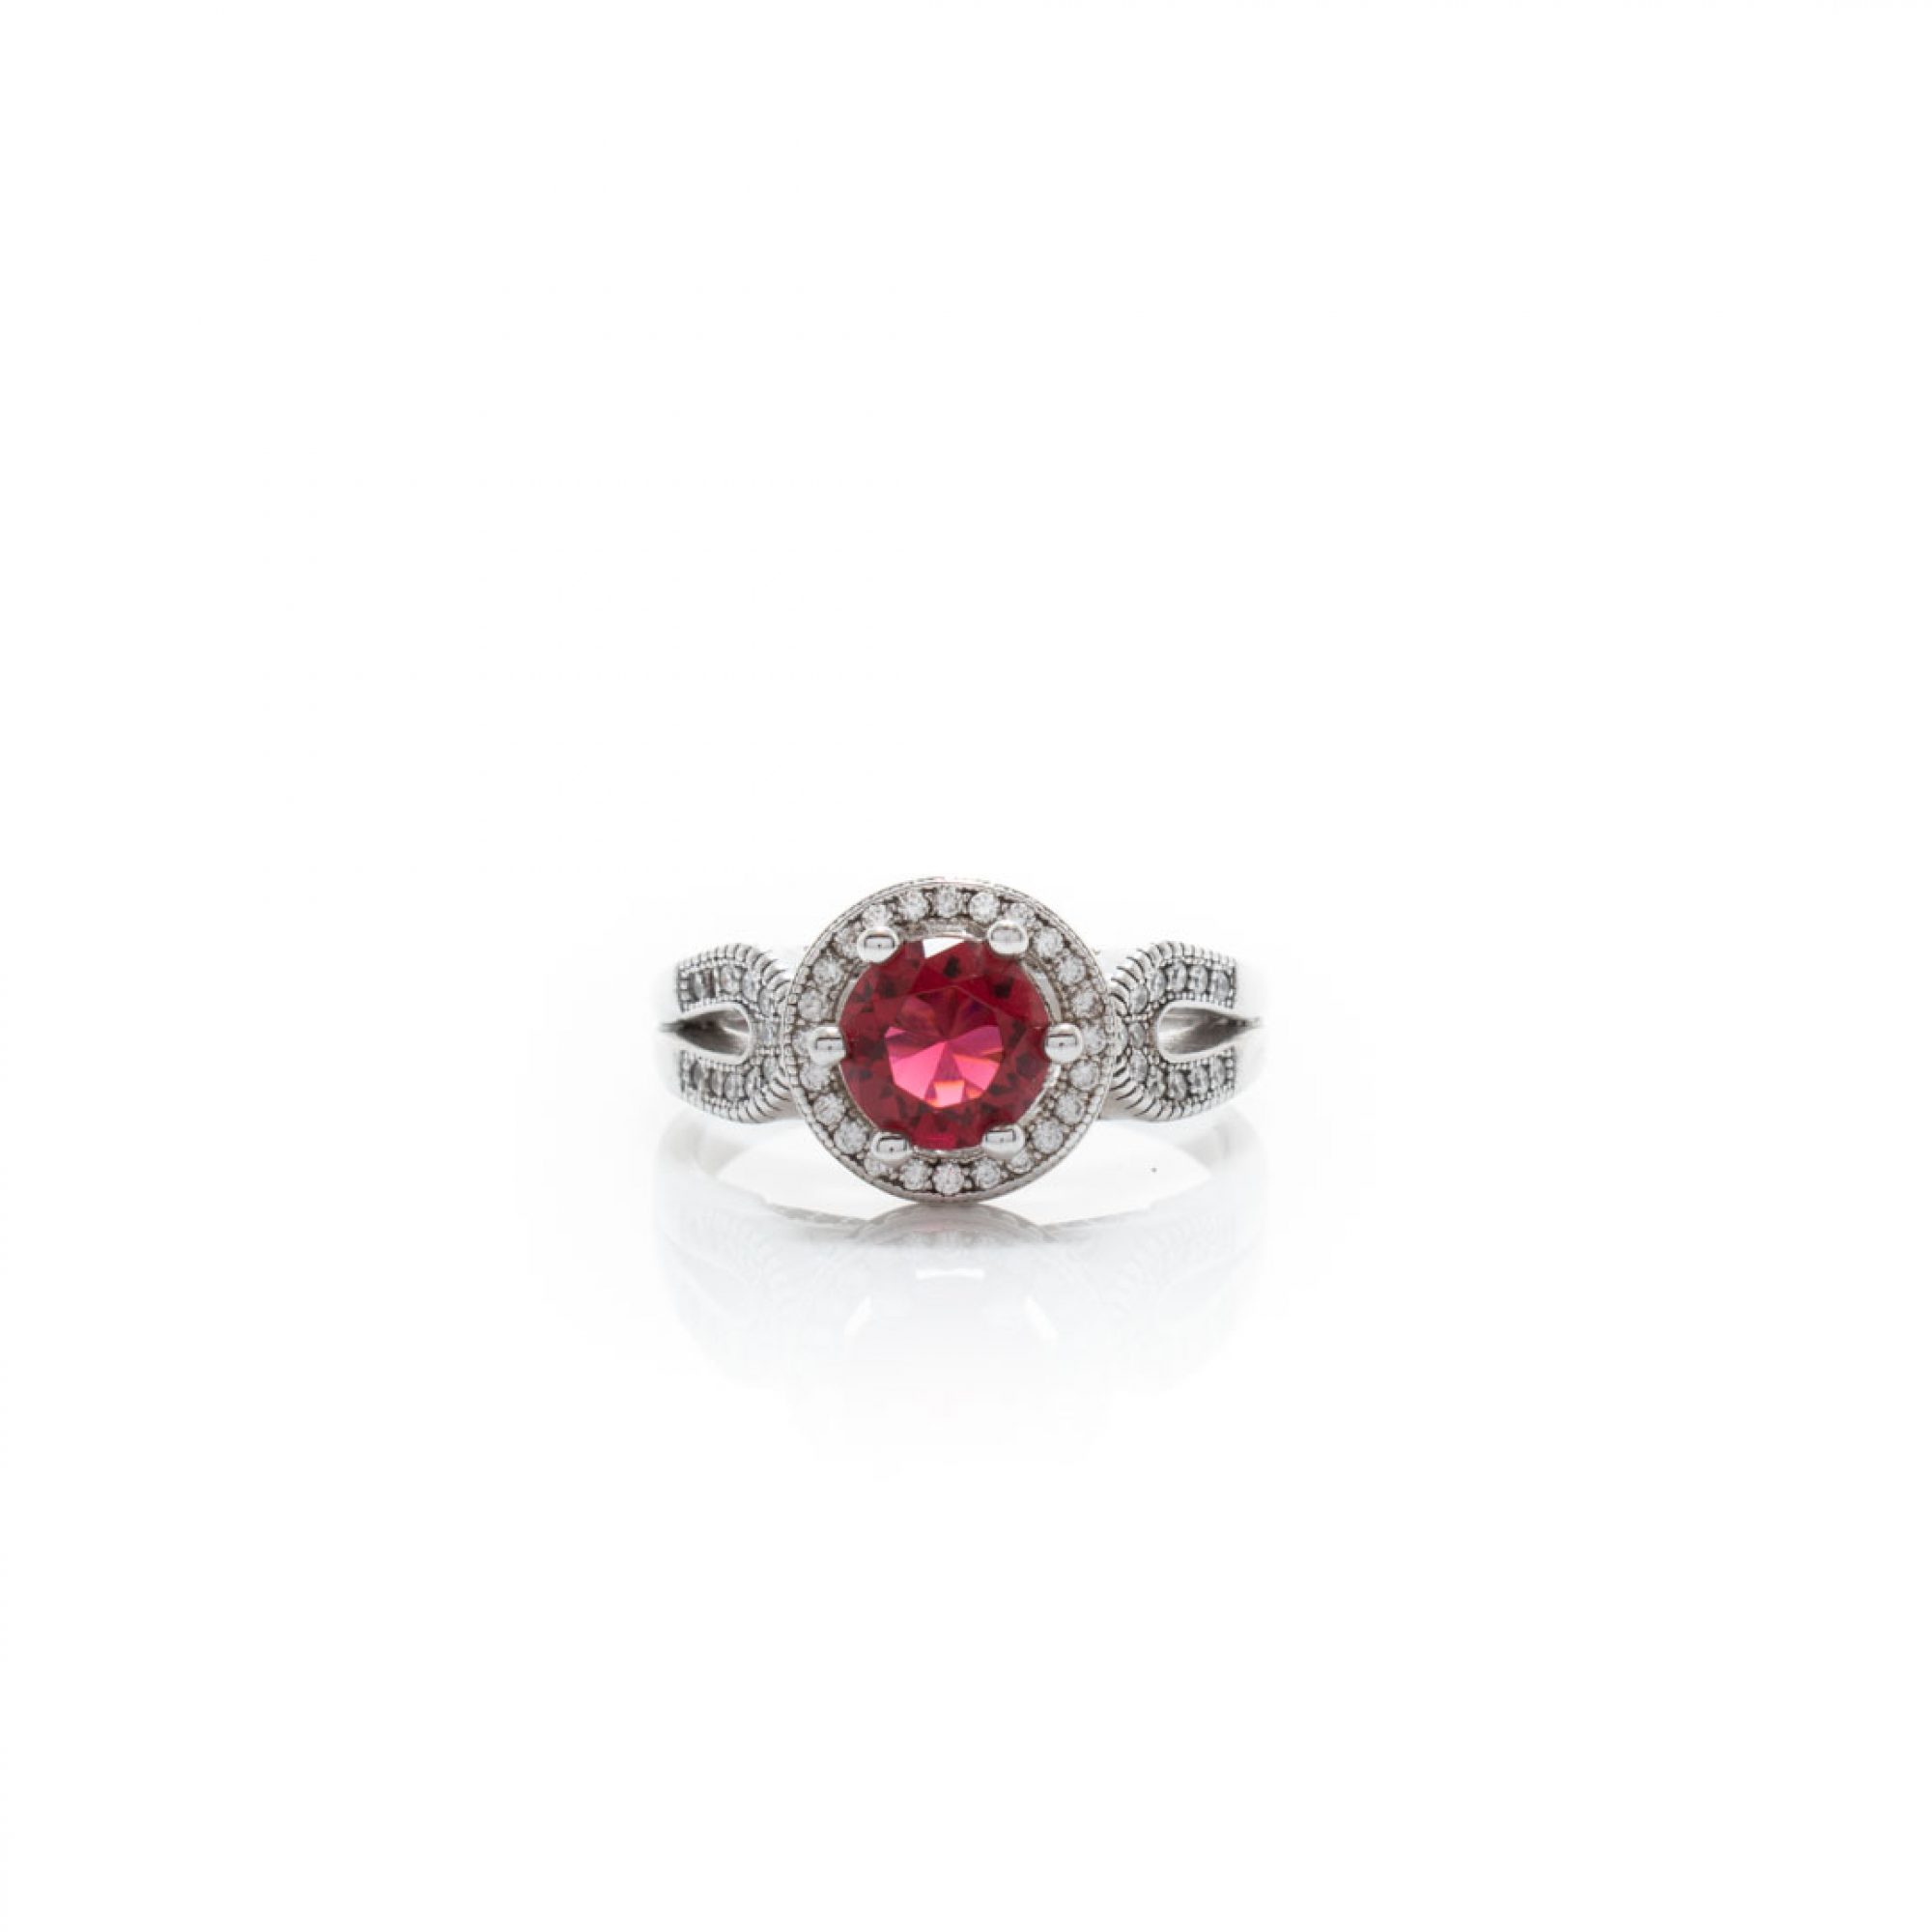 Ring with ruby and zircon stones